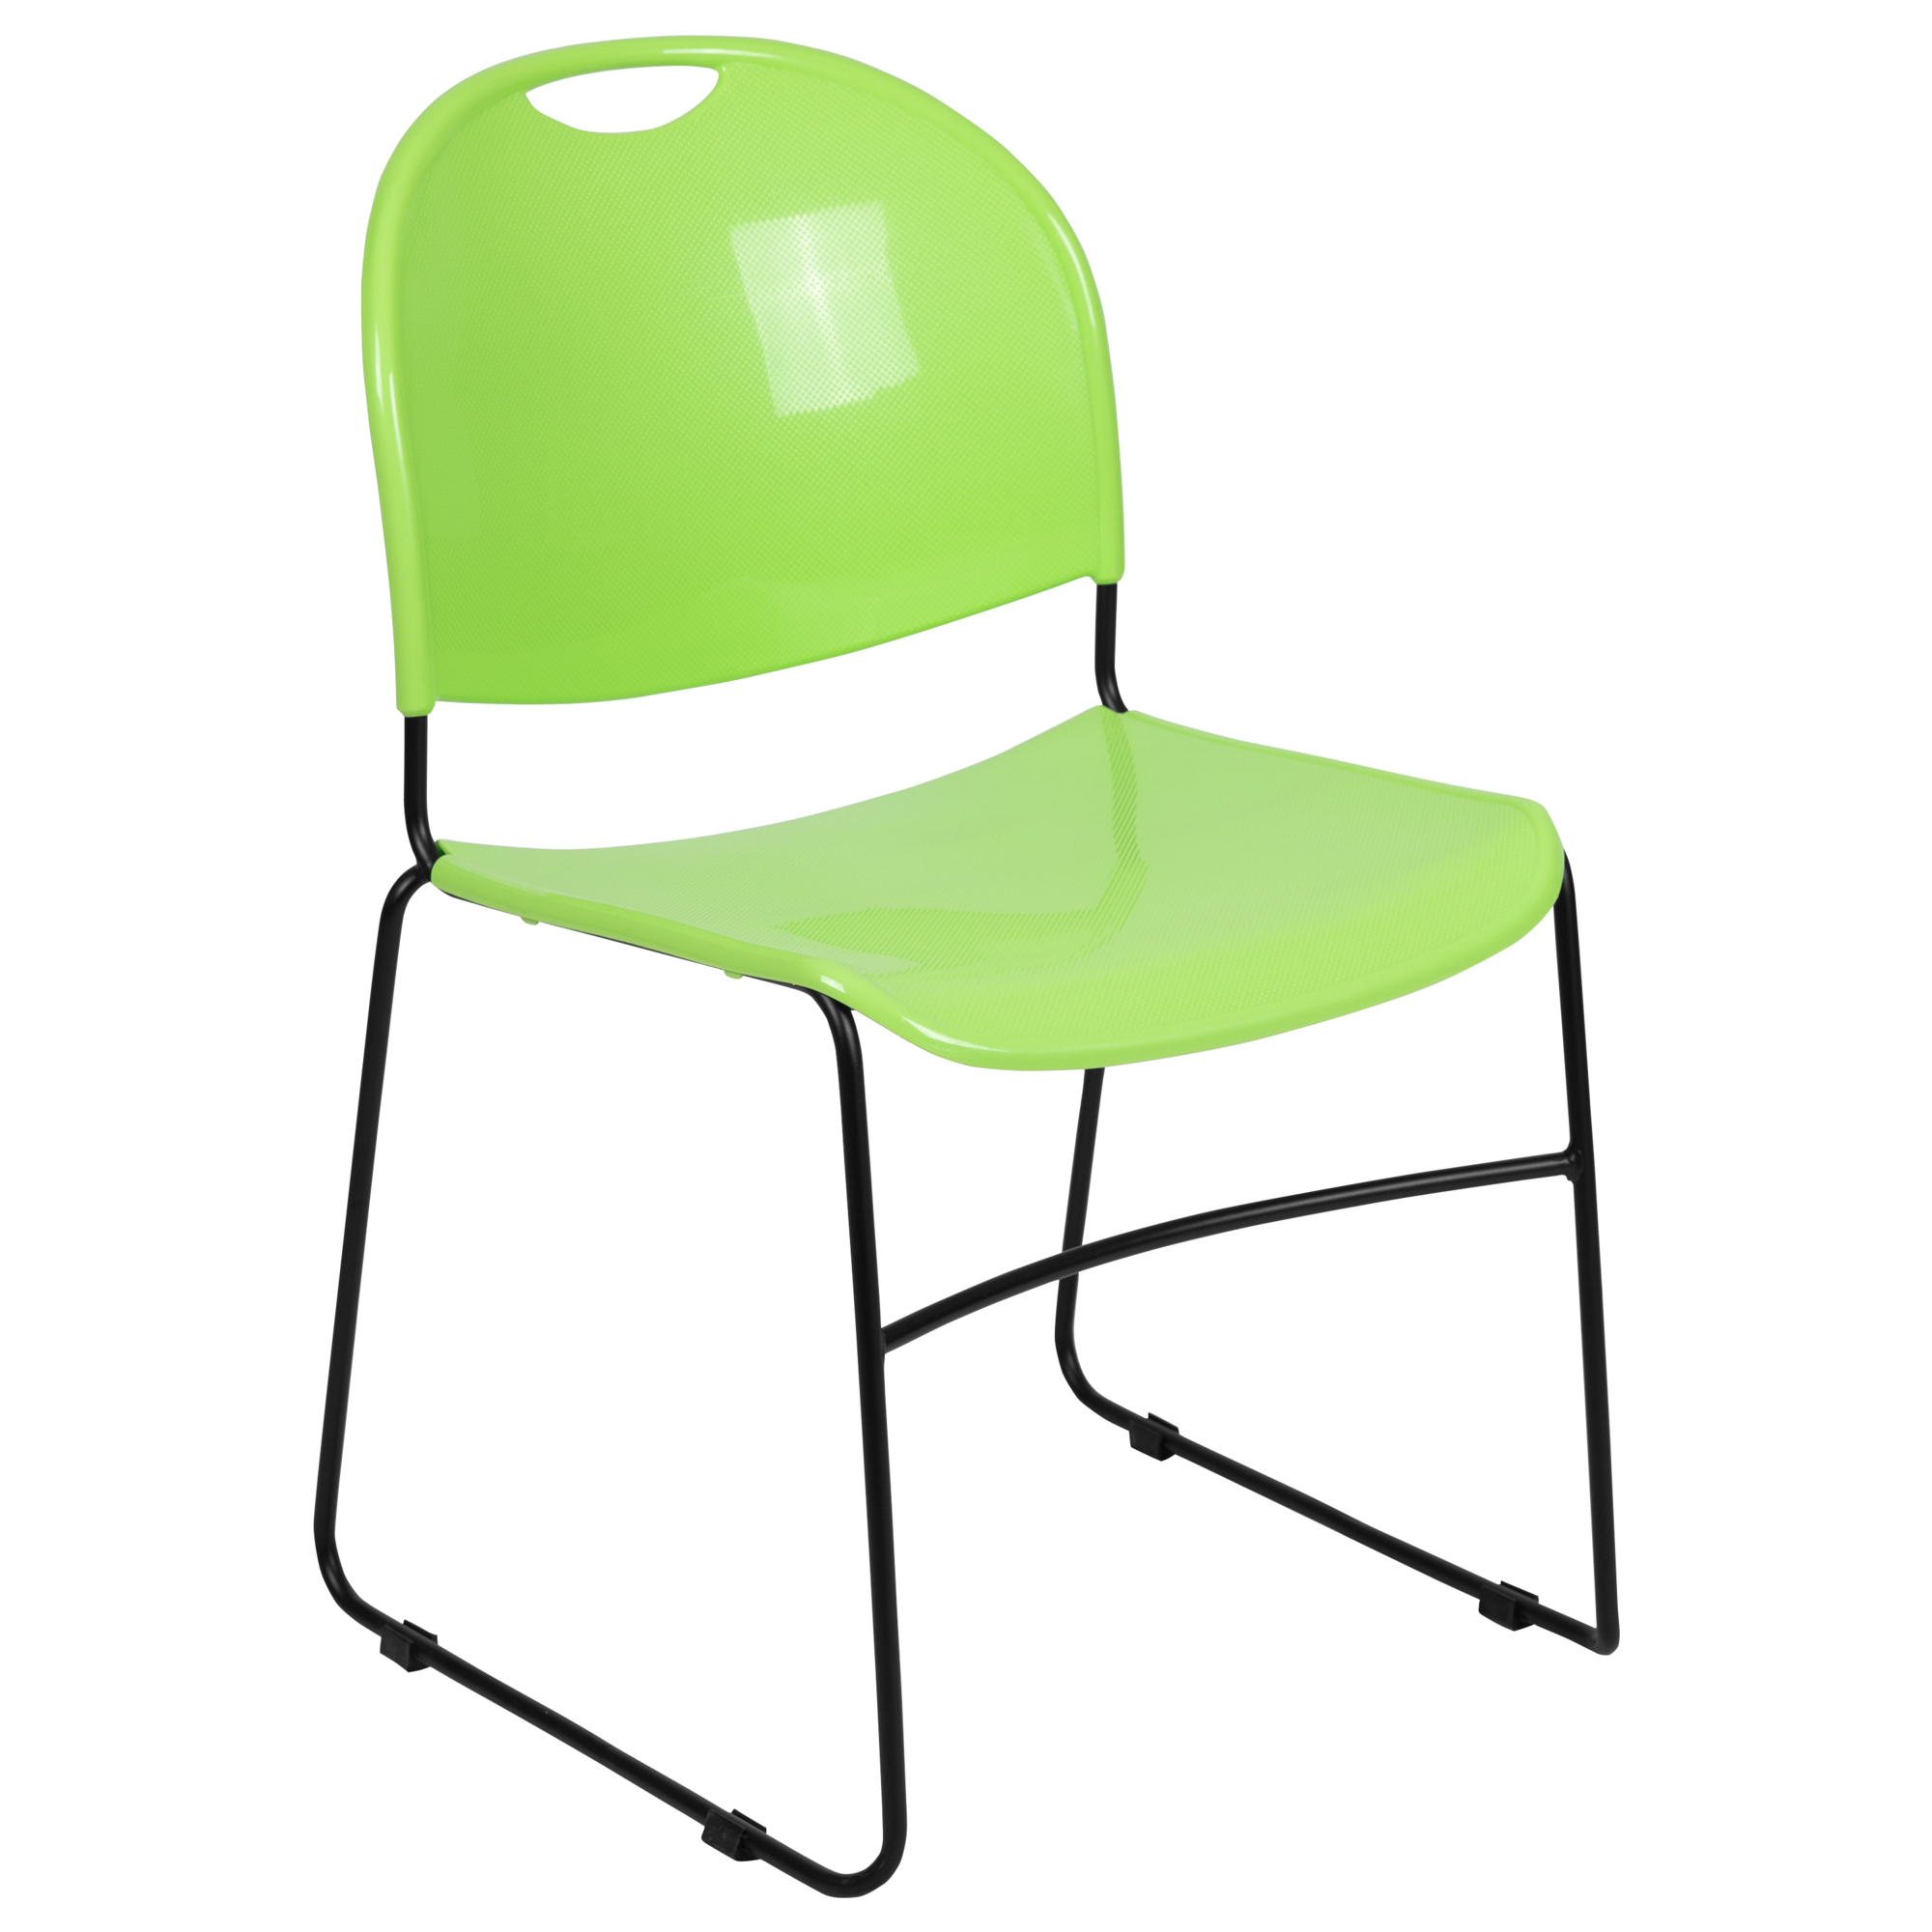 Flash Furniture, Green Compact School Stack Chair - Guest Chair, Primary Color Green, Included (qty.) 1, Model RUT188GN